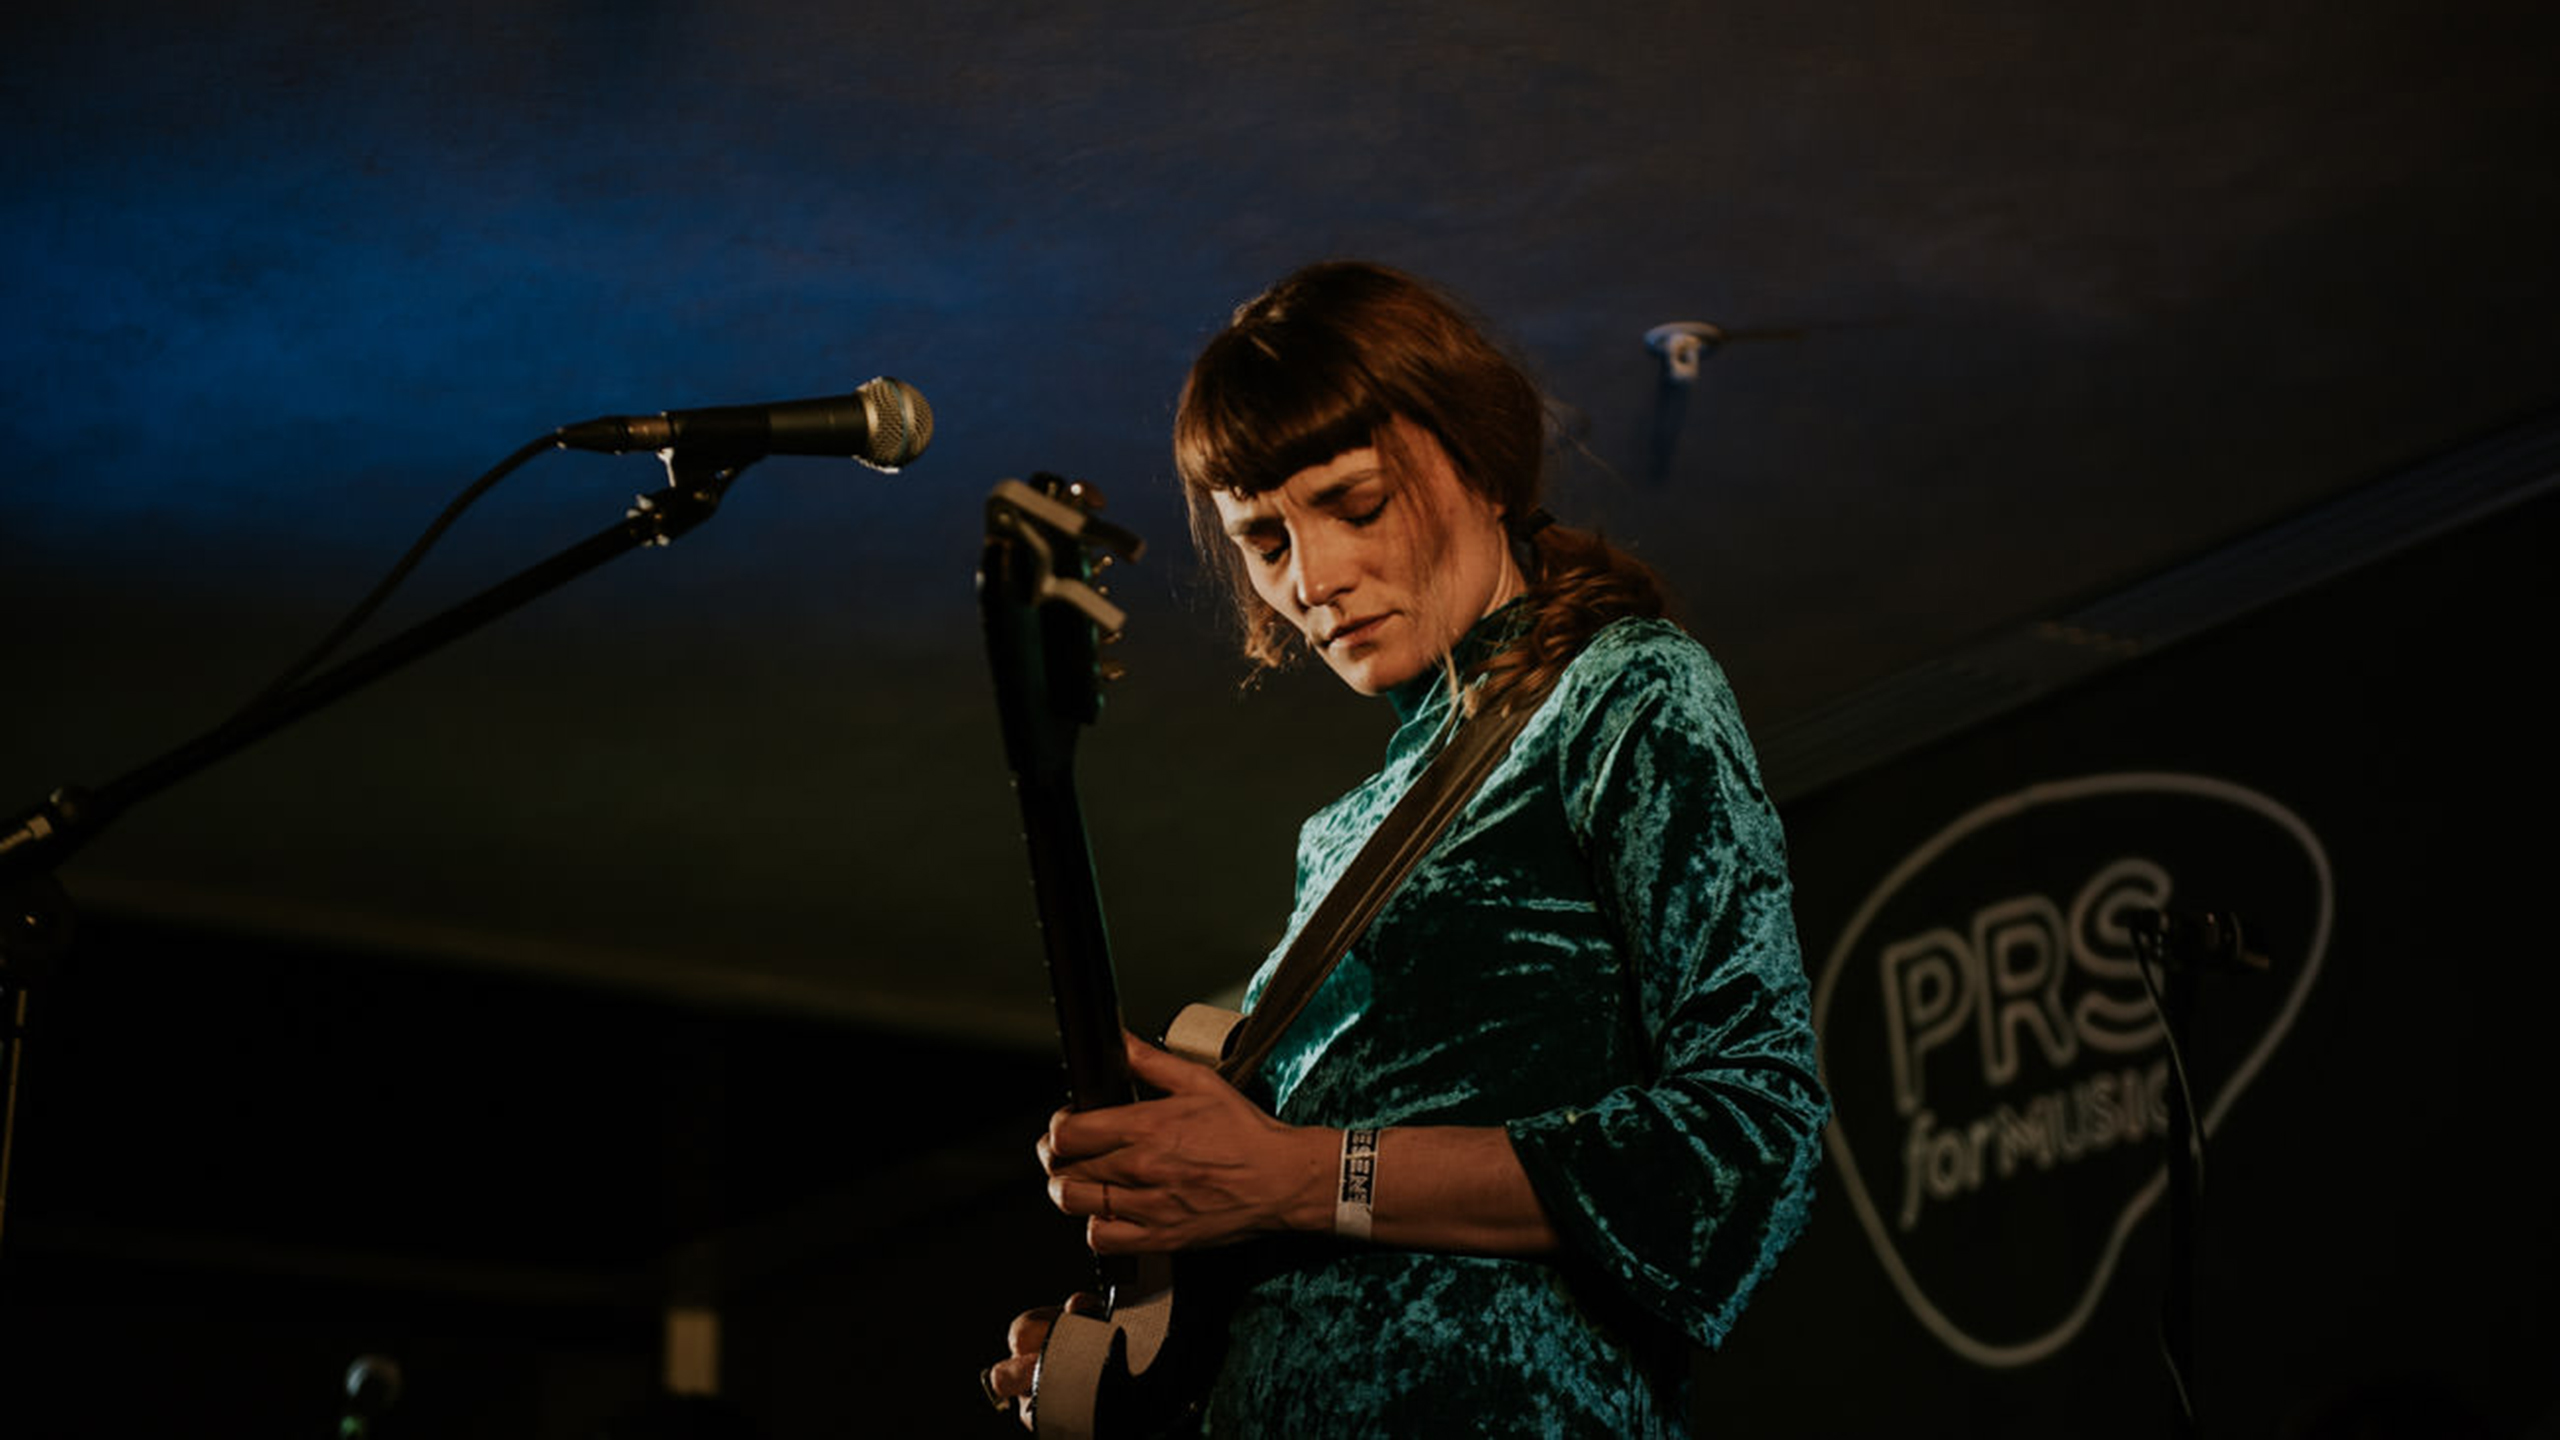 Halo Maud, wearing a green velvet dress, playing guitar on stage at PRS for Music Presents